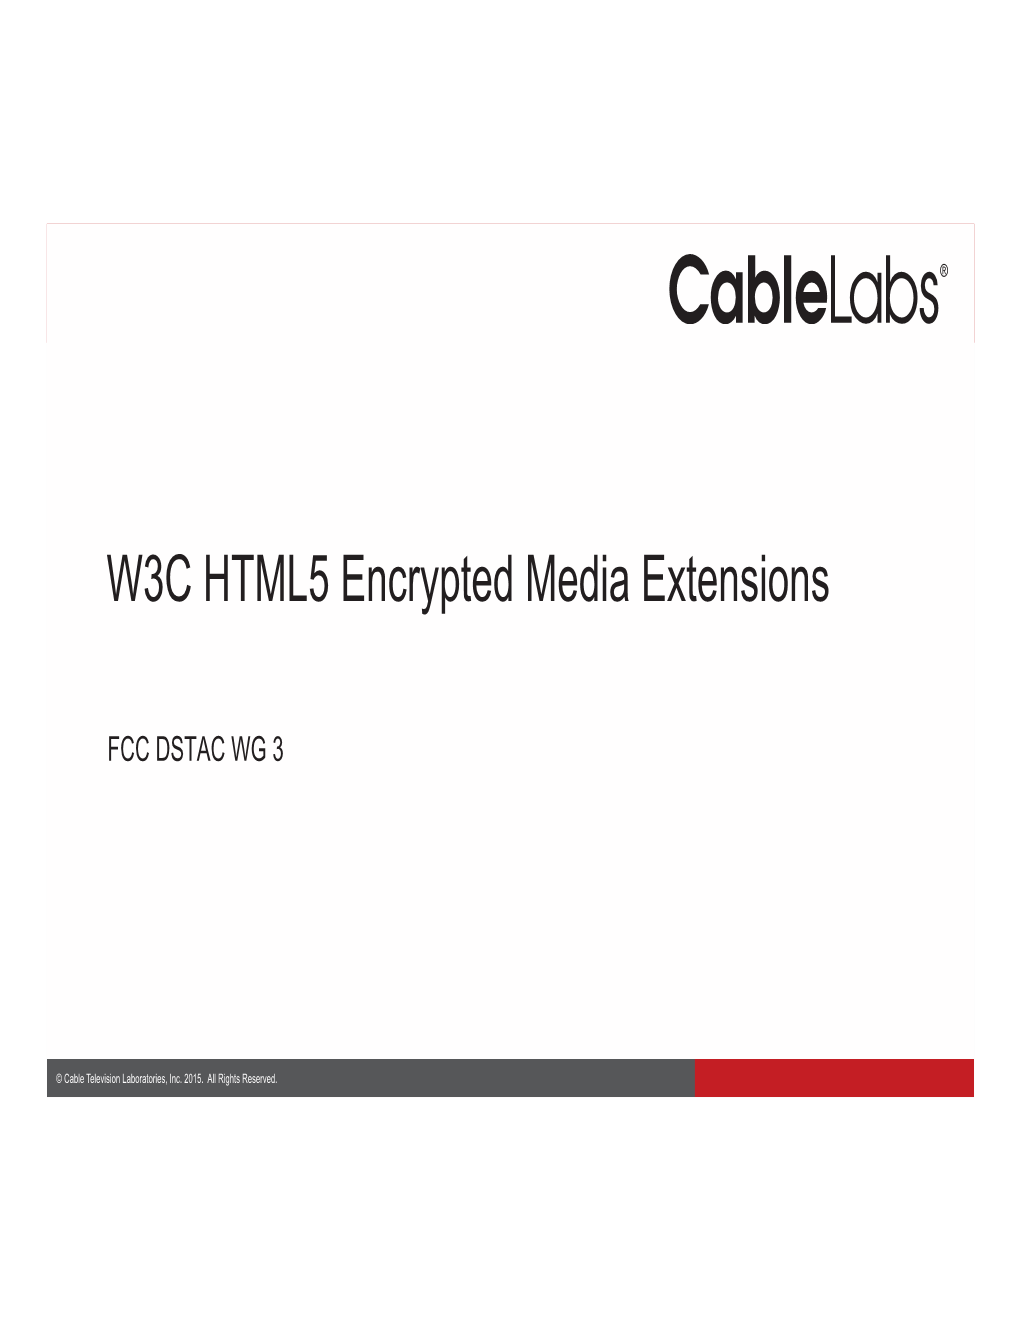 W3C HTML5 Encrypted Media Extensions